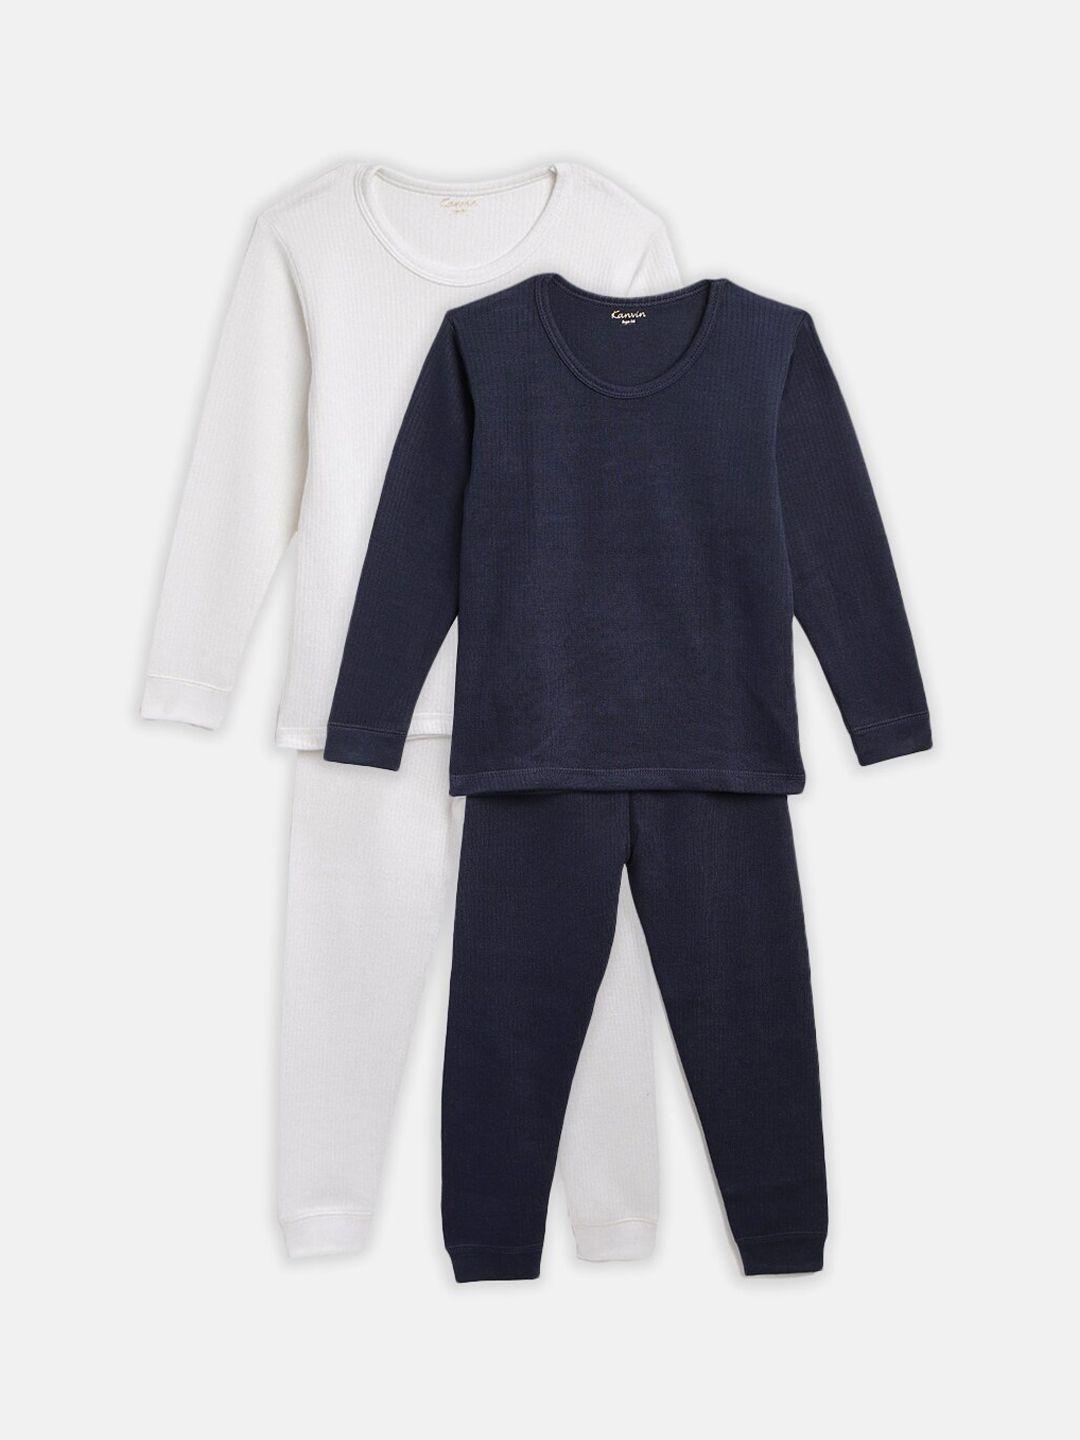 kanvin boys pack of 2 navy blue & white solid thermal sets